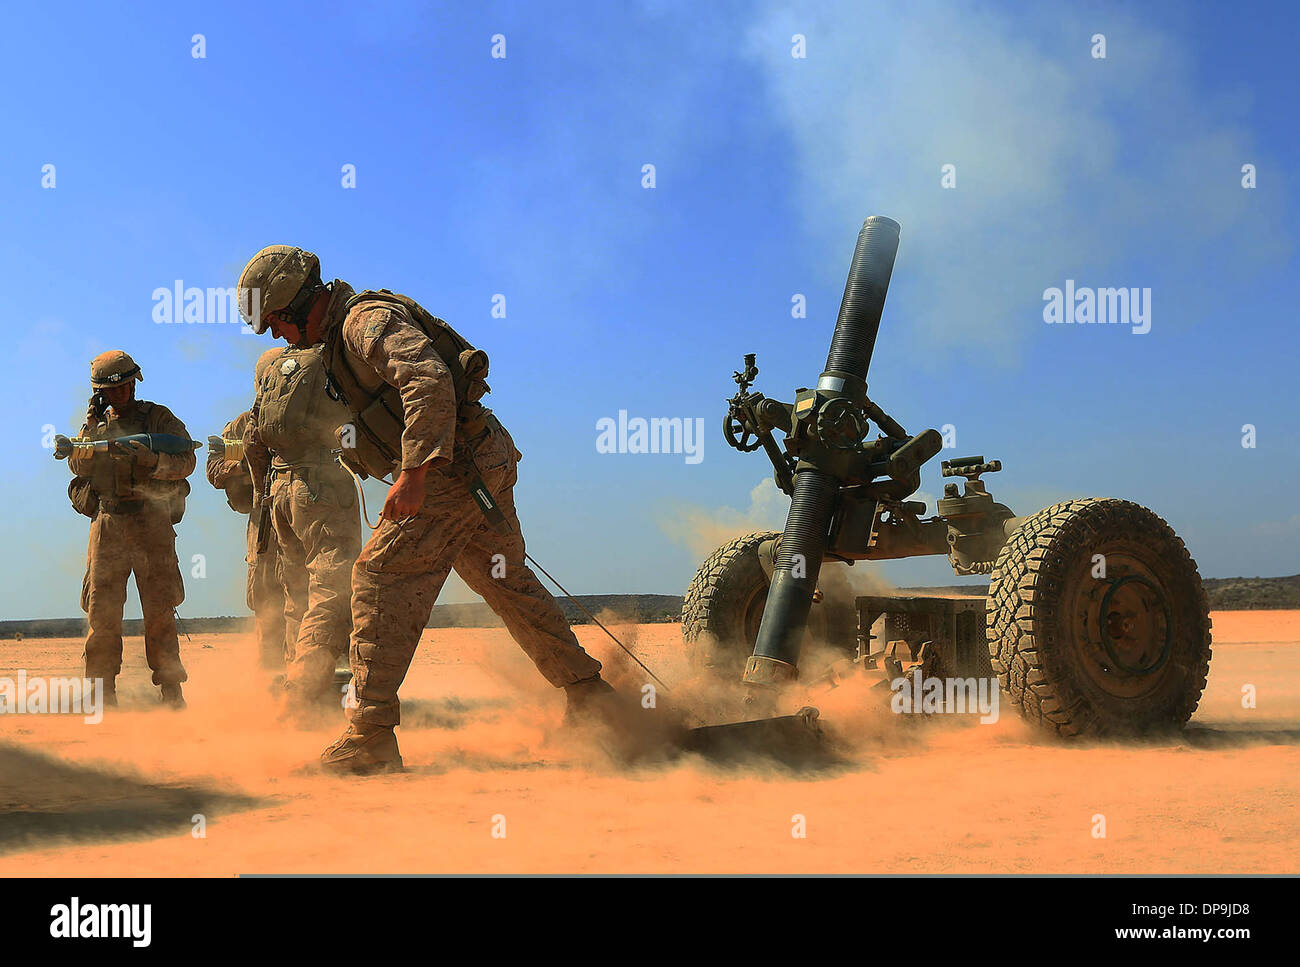 U.S. Marines fire an M327 120mm towed mortar system during a sustainment training exercise Stock Photo